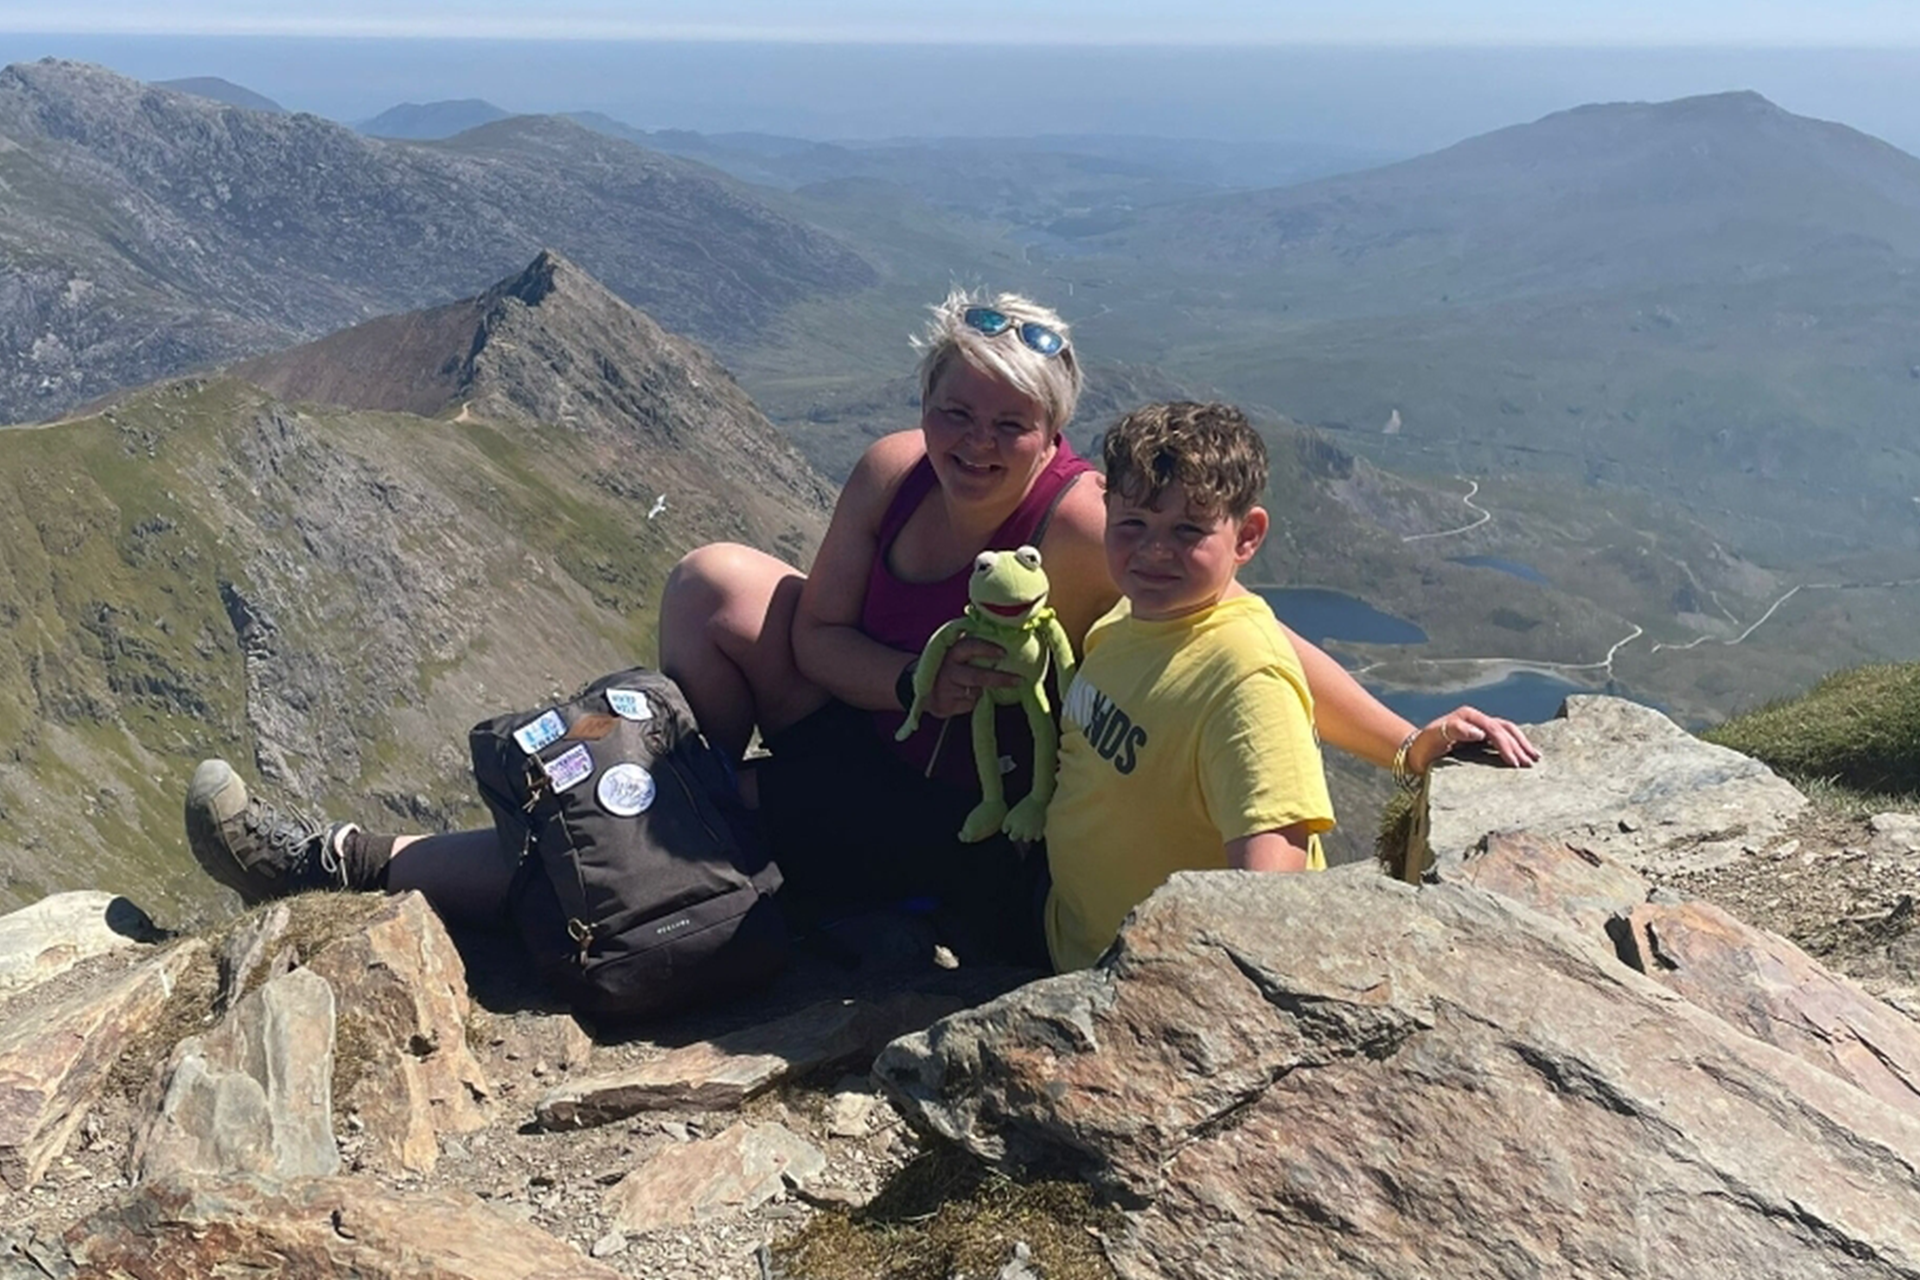 Flynn and his mum on the Snowdon mountain with a Kermit the frog toy.